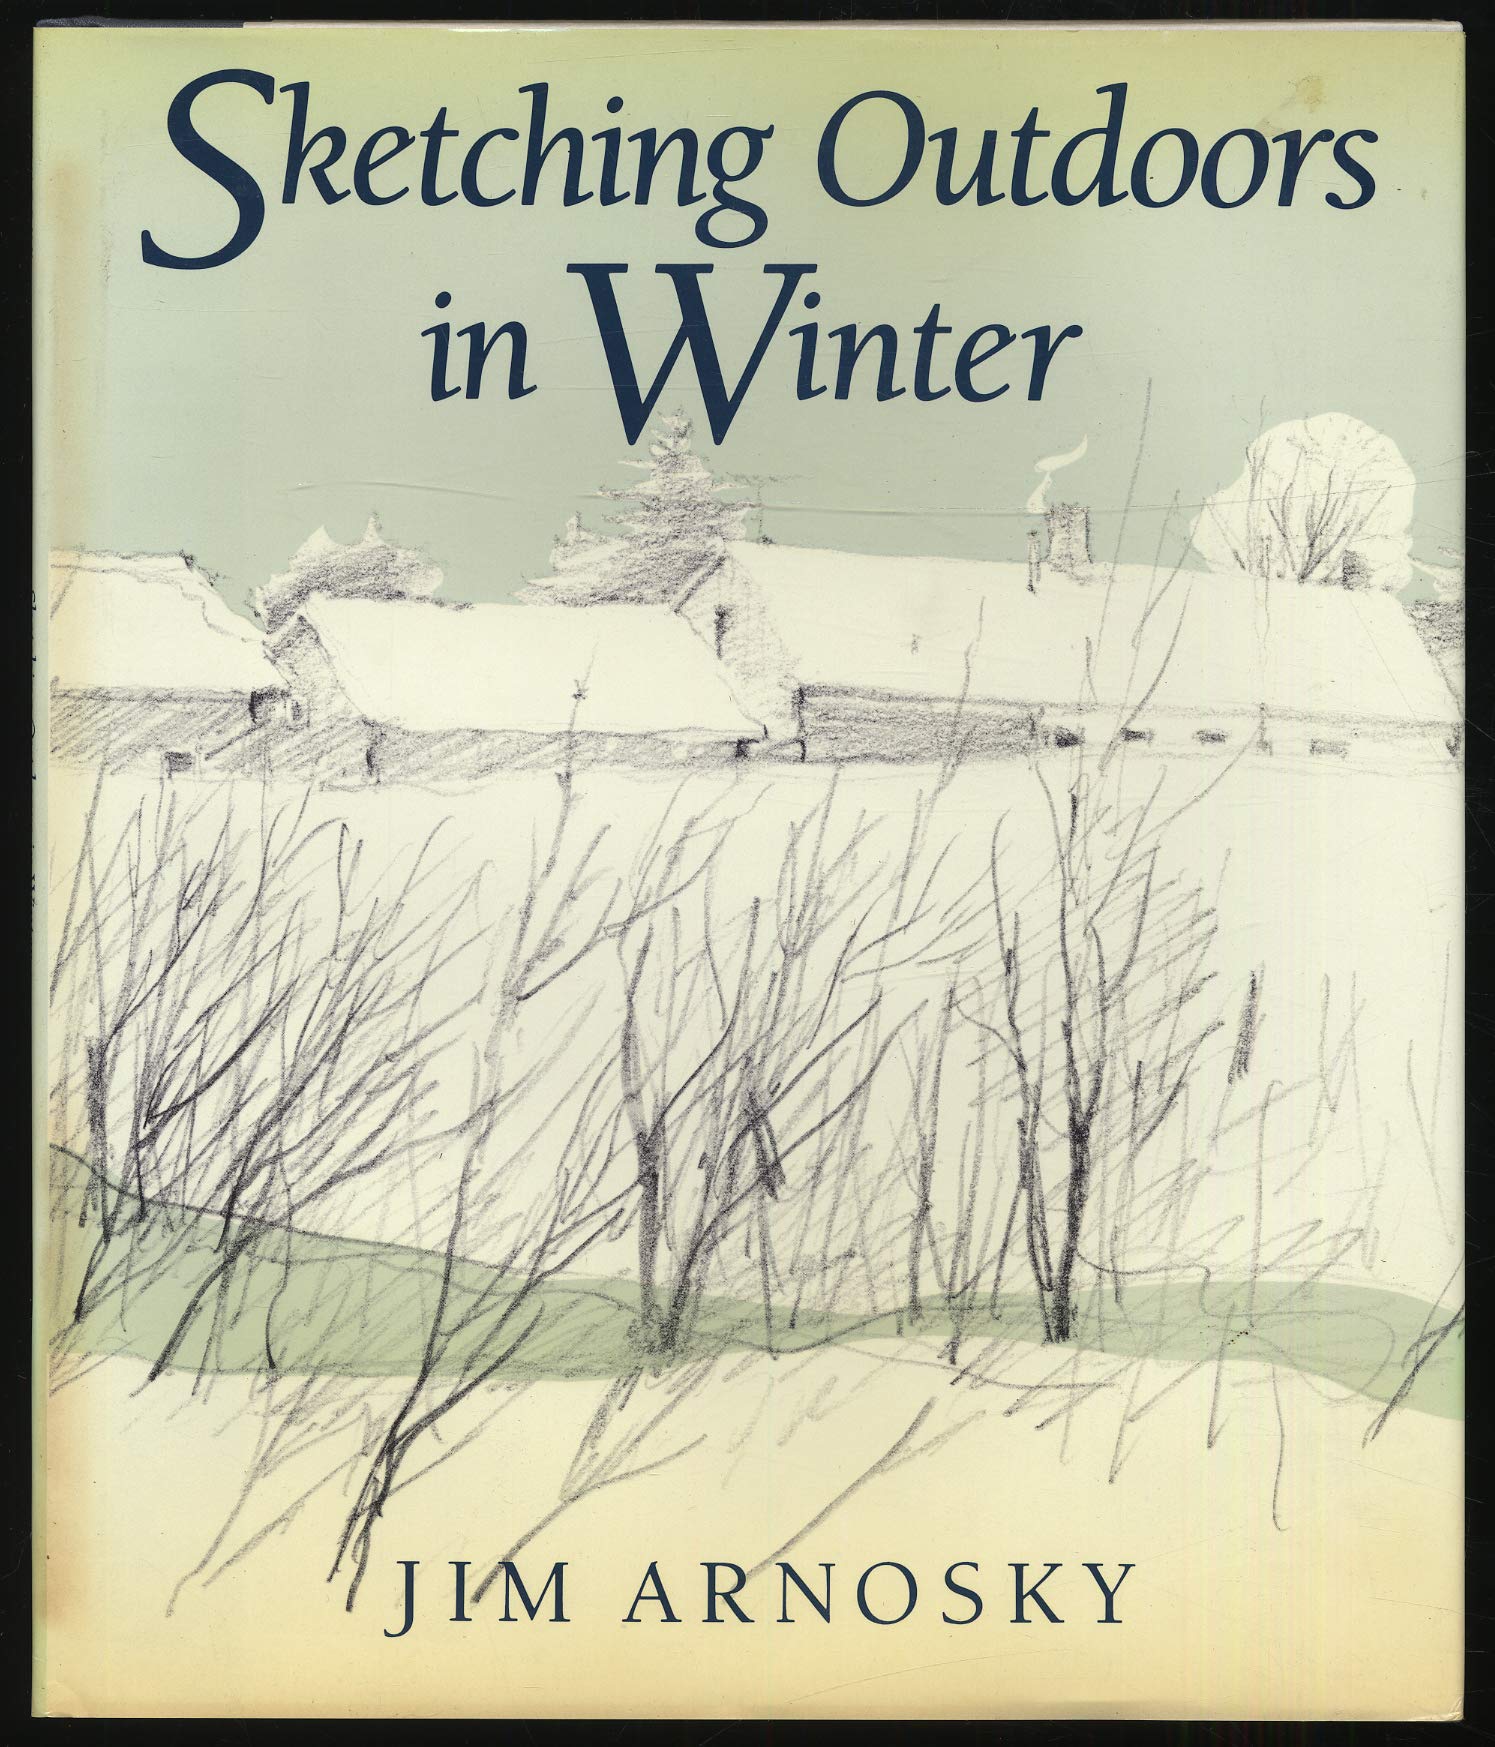 Sketching Outdoors in Winter